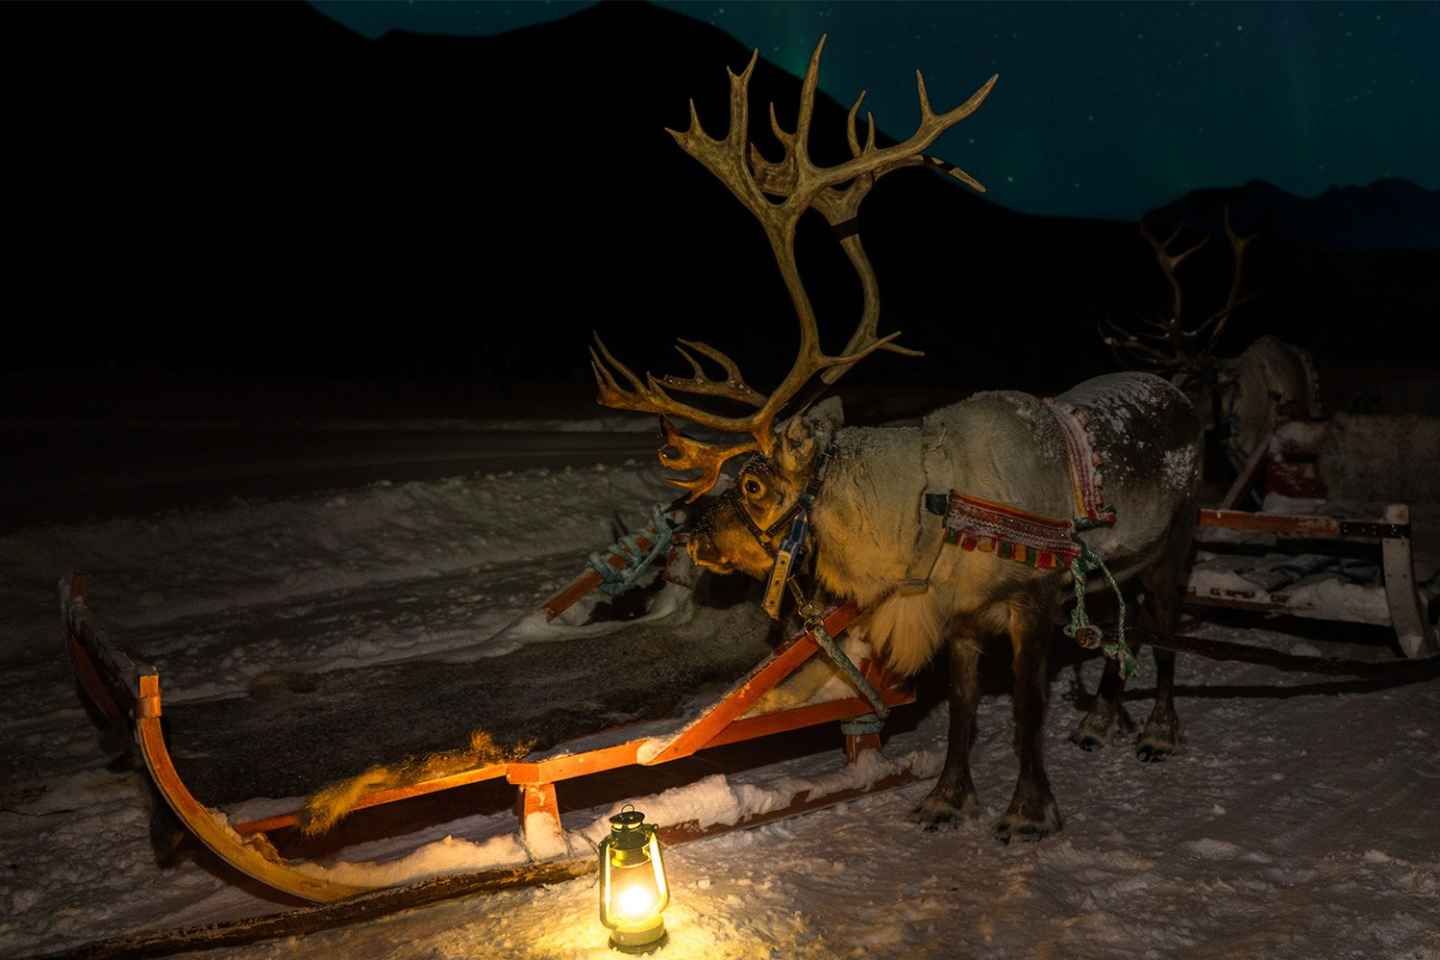 Tromso: Reindeer Sledding with Chance to See Northern Lights